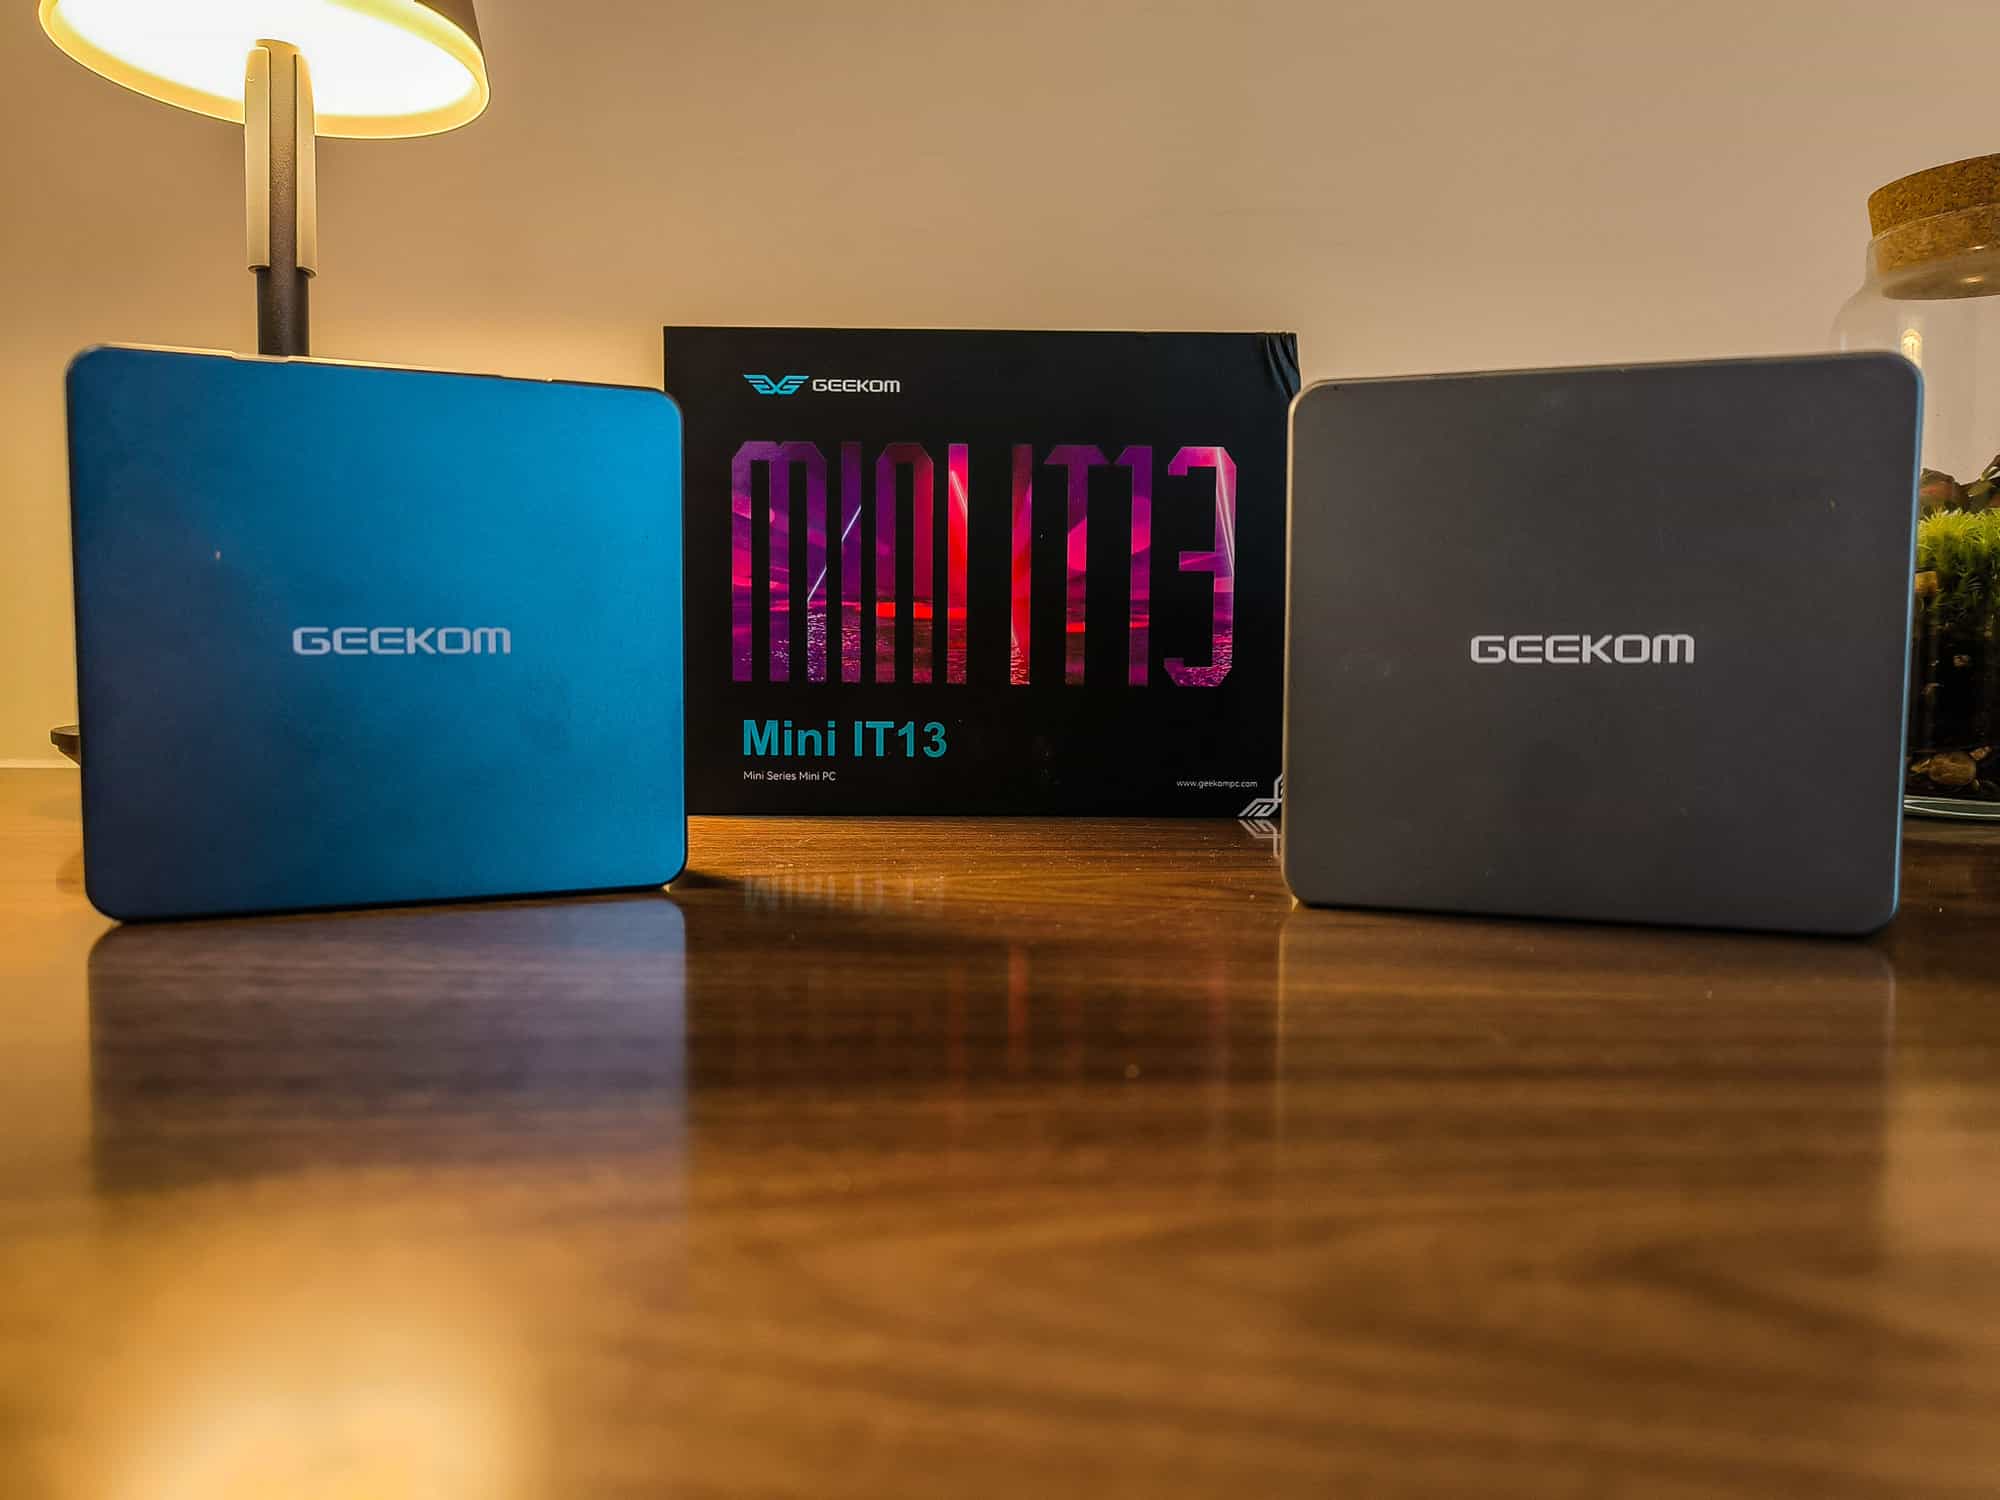 Geekom Mini IT13 Mini PC Review: The first mini PC with the Intel Core i9-13900H